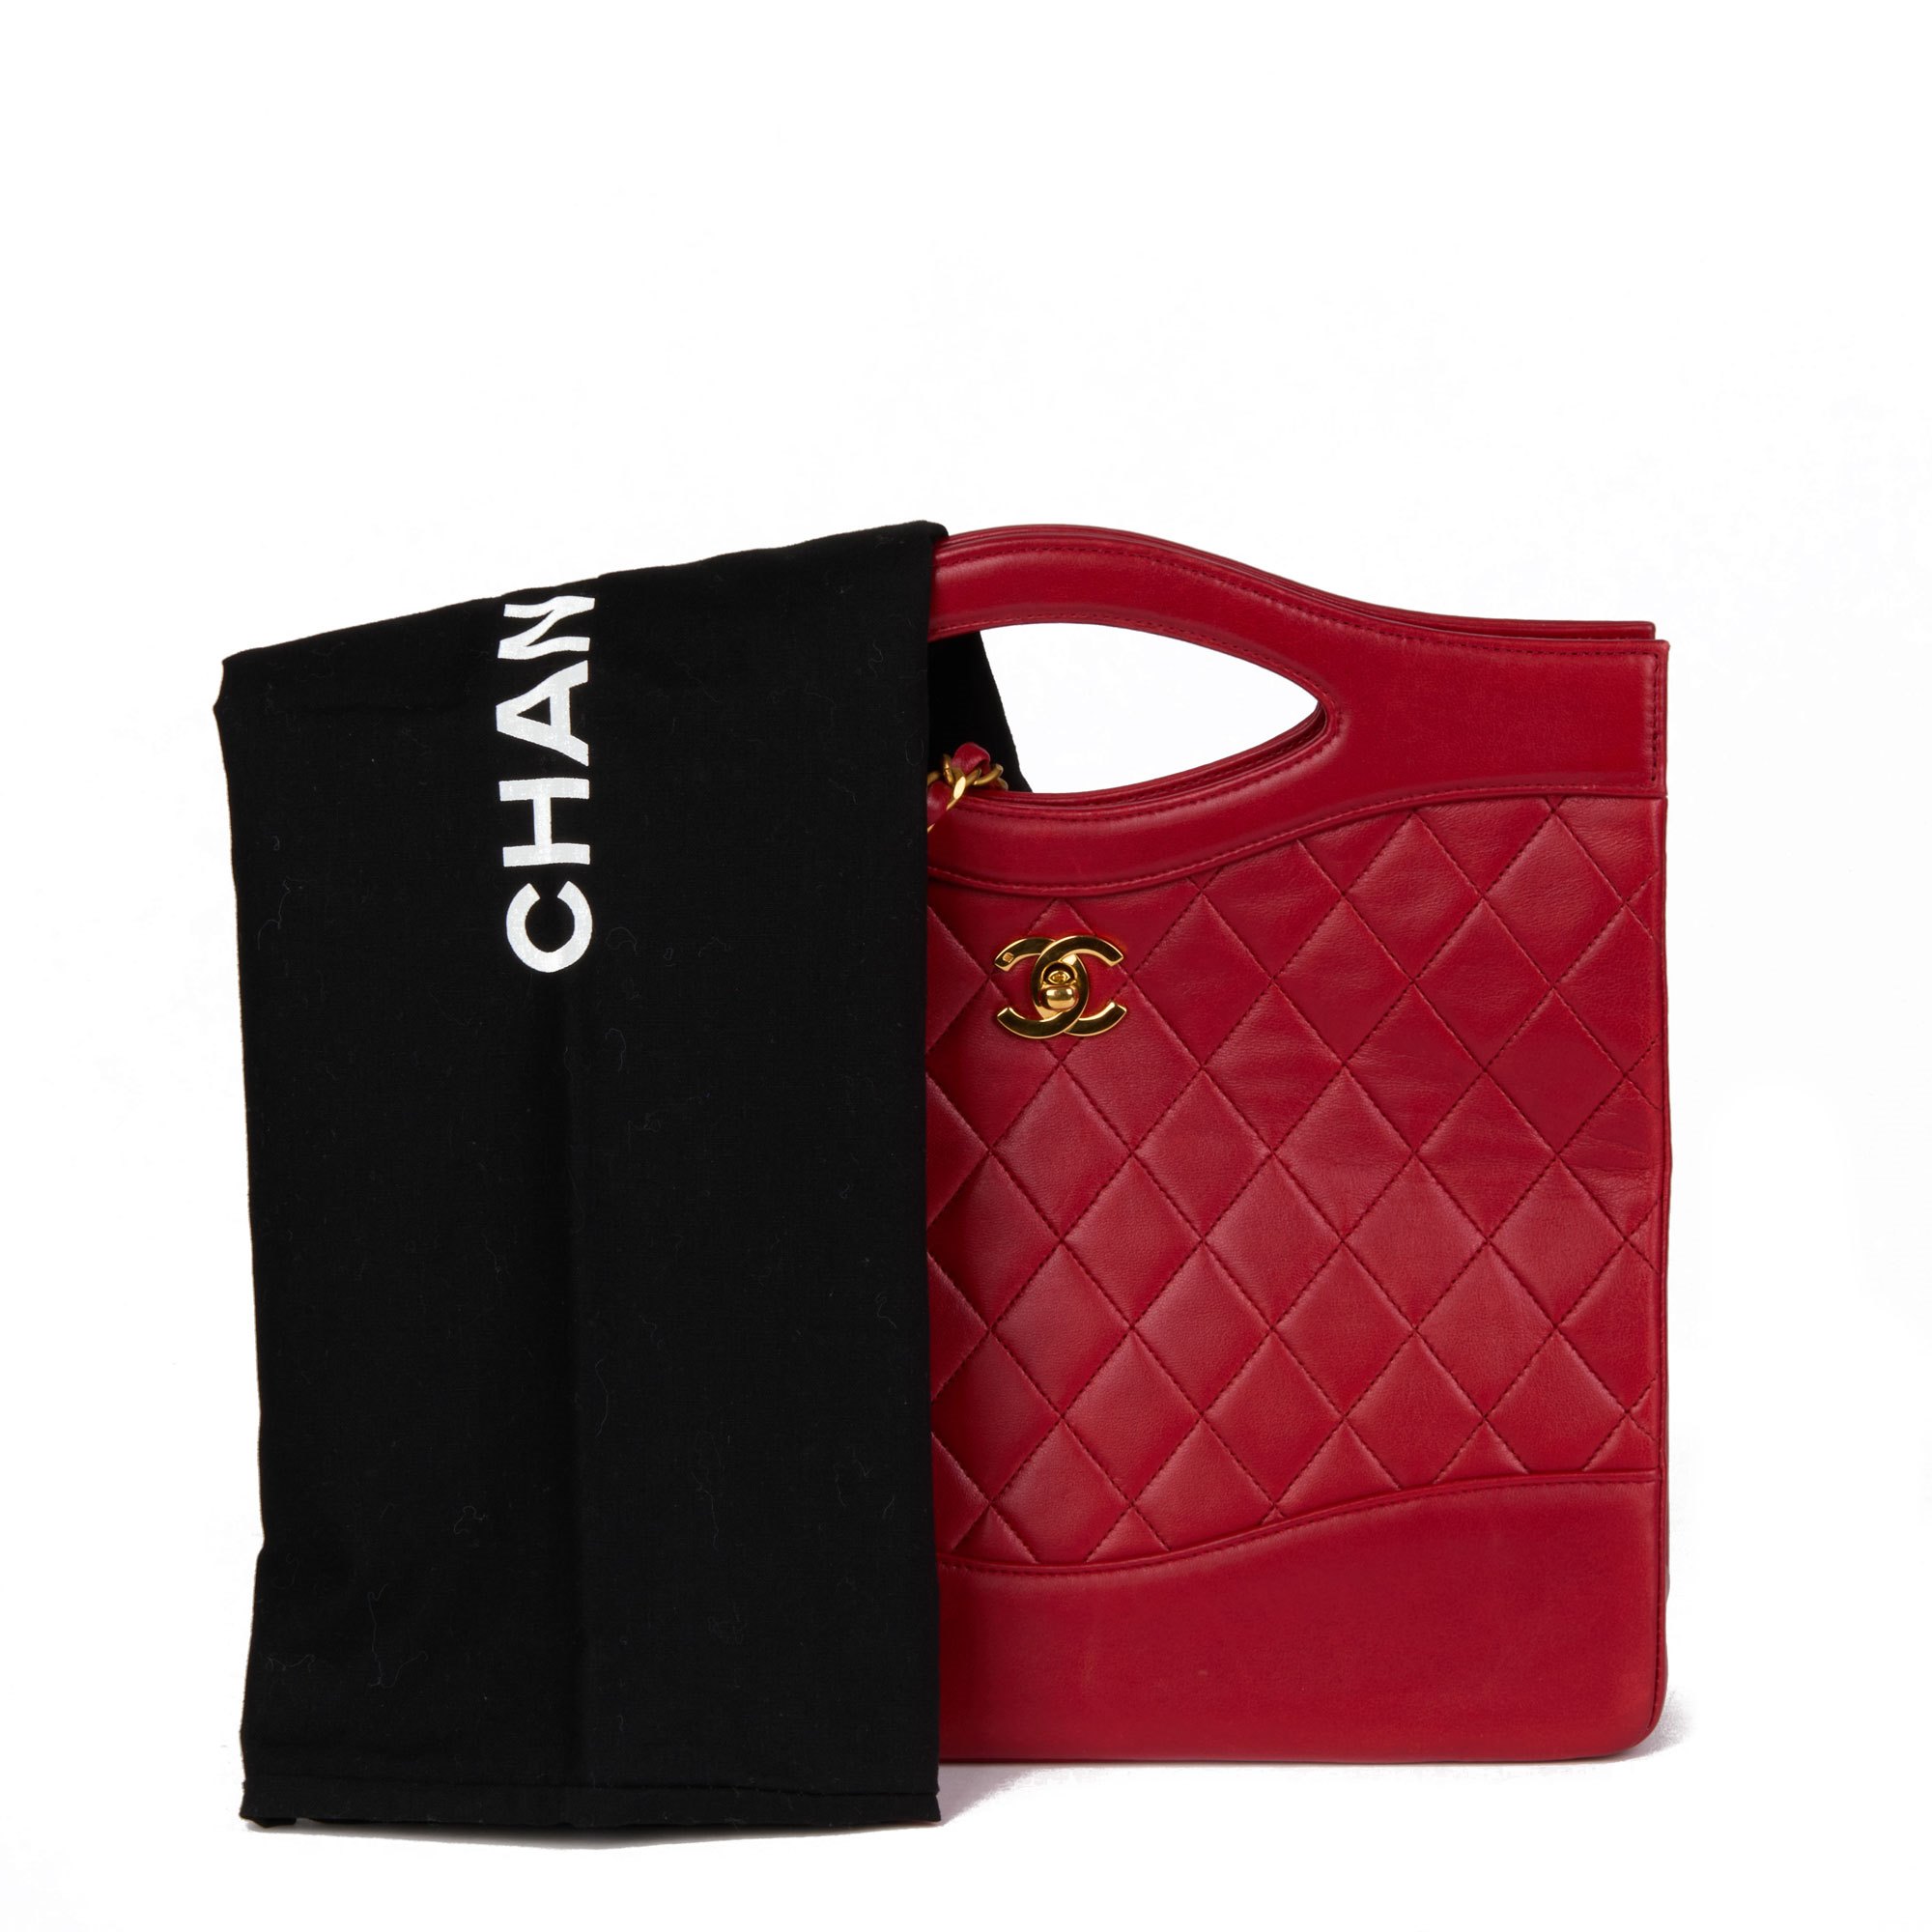 Chanel Red Quilted Lambskin Vintage Classic Shoulder Tote